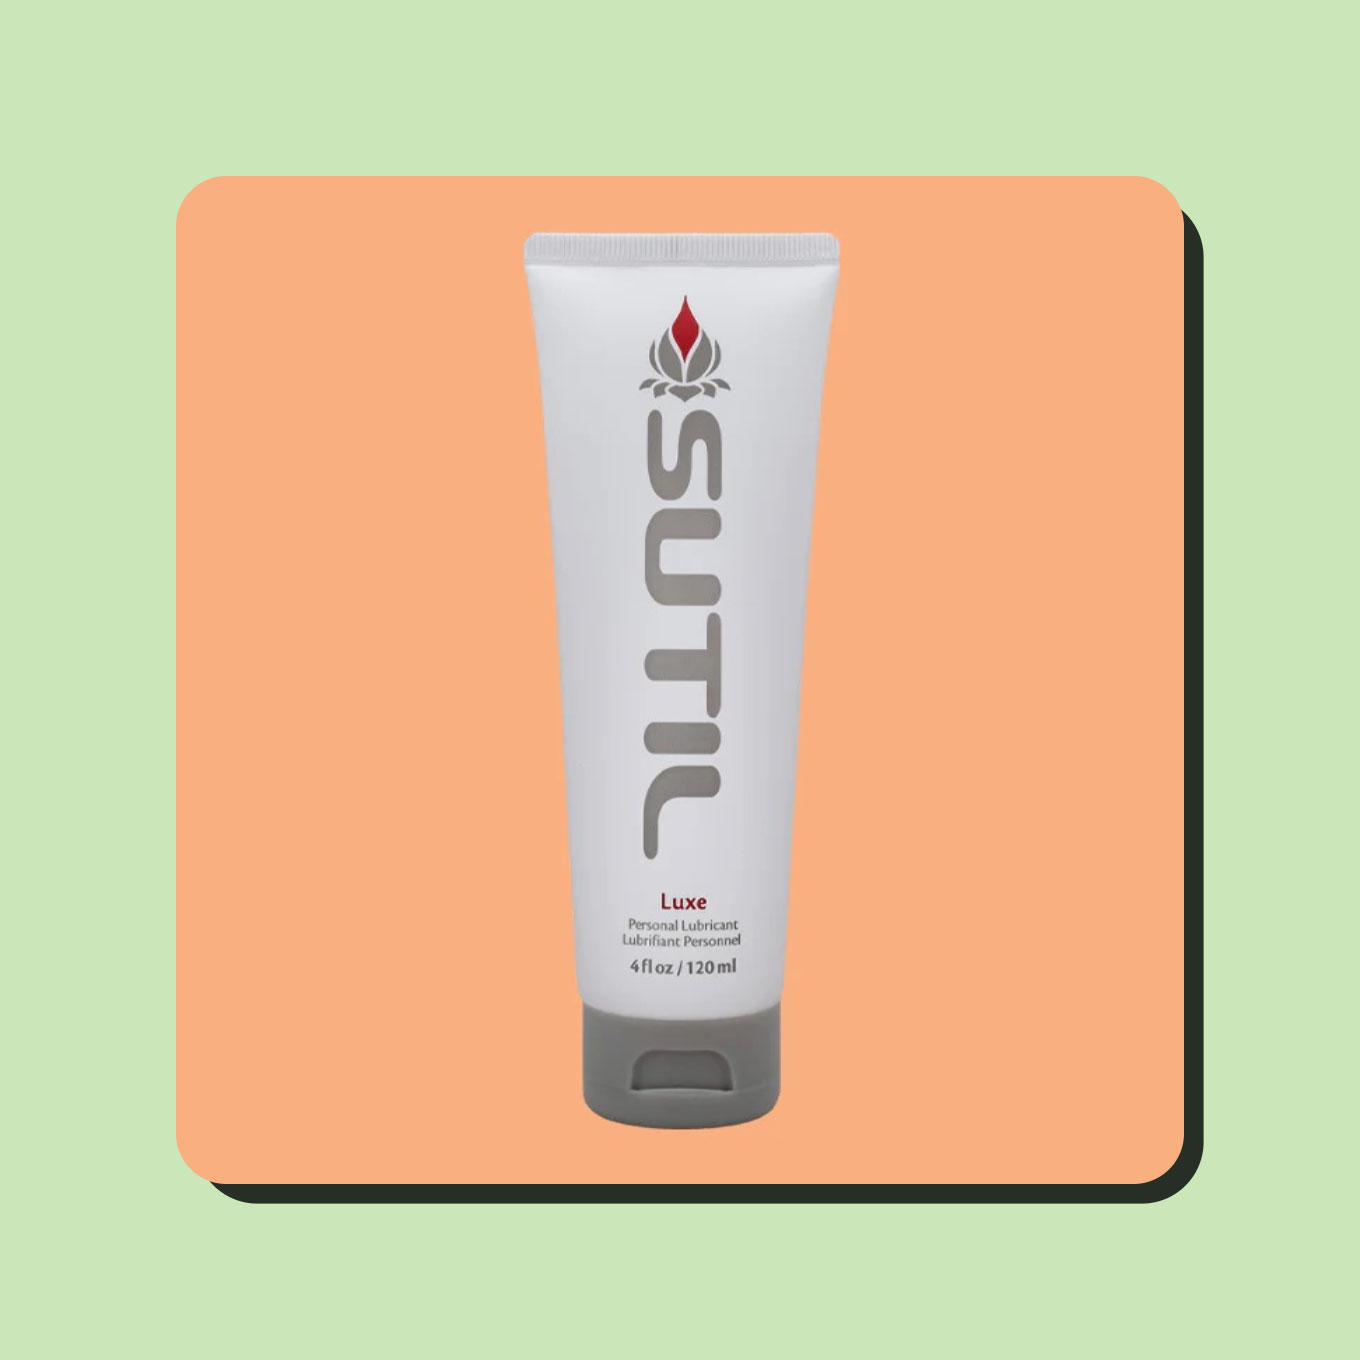 A bottle of luxe lubricant from SUTIL